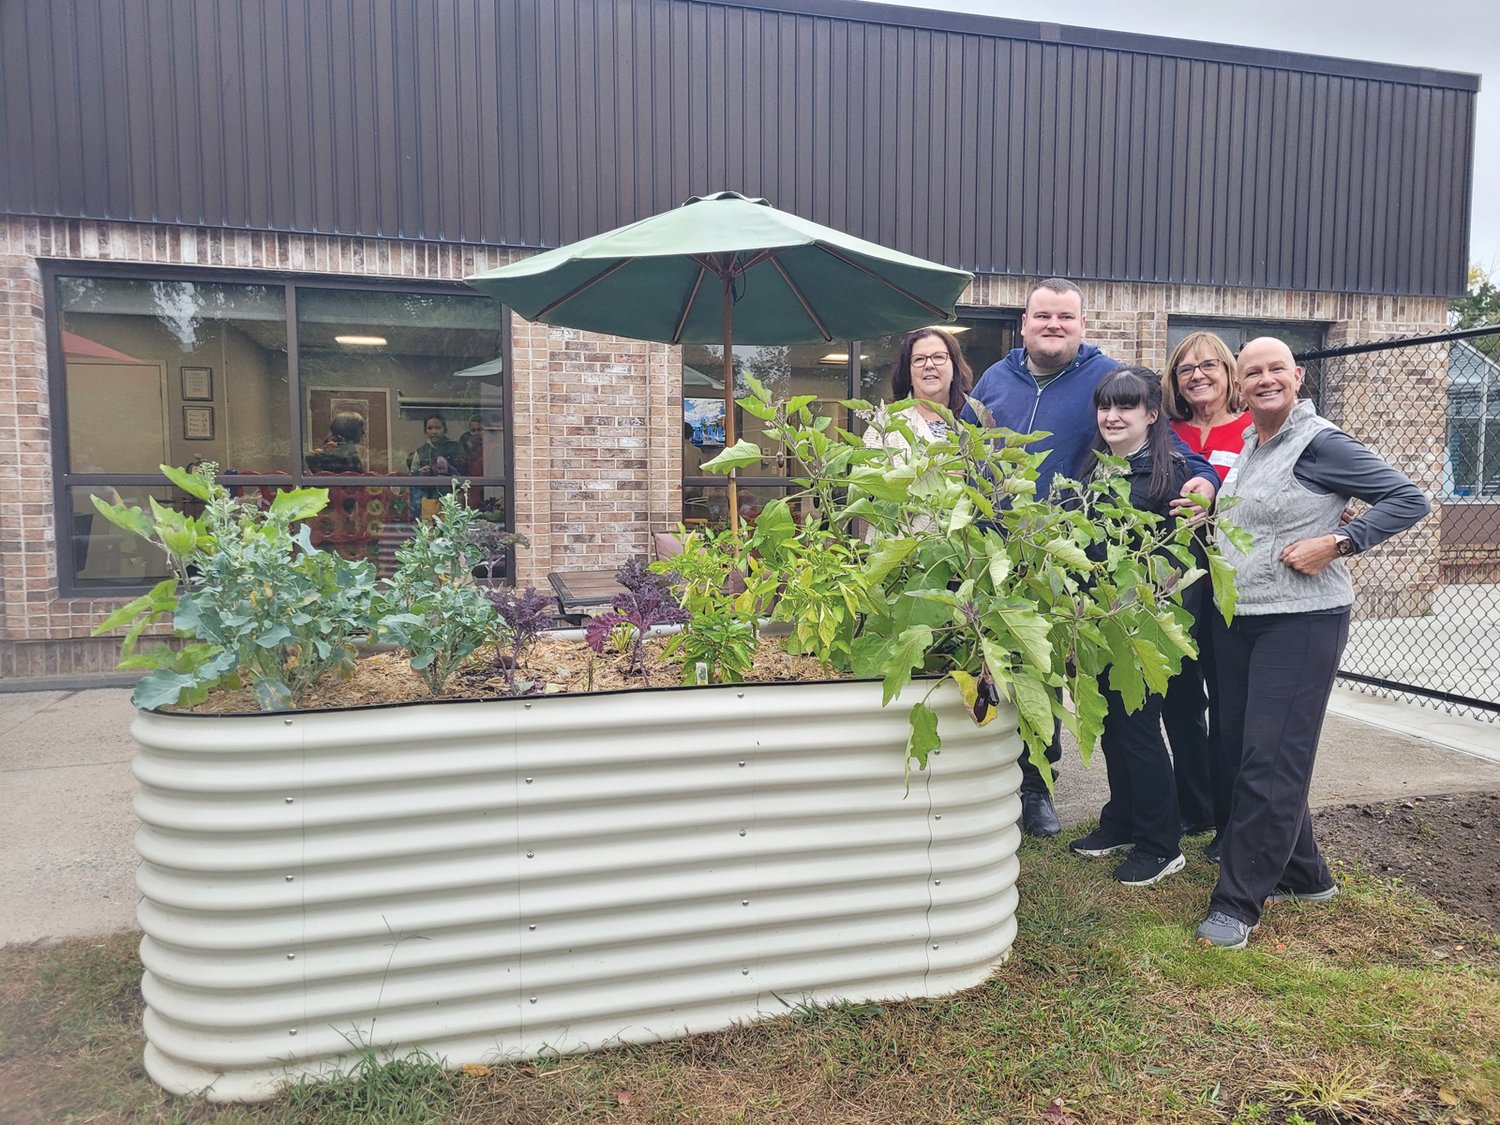 SEEDING SUCCESS: From left to right, The Autism Project (TAP) Executive Director Joanne G. Quinn, Unity Community members Patrick Quinn and Nicole Cadick, and TAP lead facilitators Lore Gray and Lisa McKay, pose for a photo behind the elevated planters outside the organization’s Atwood Avenue headquarters.